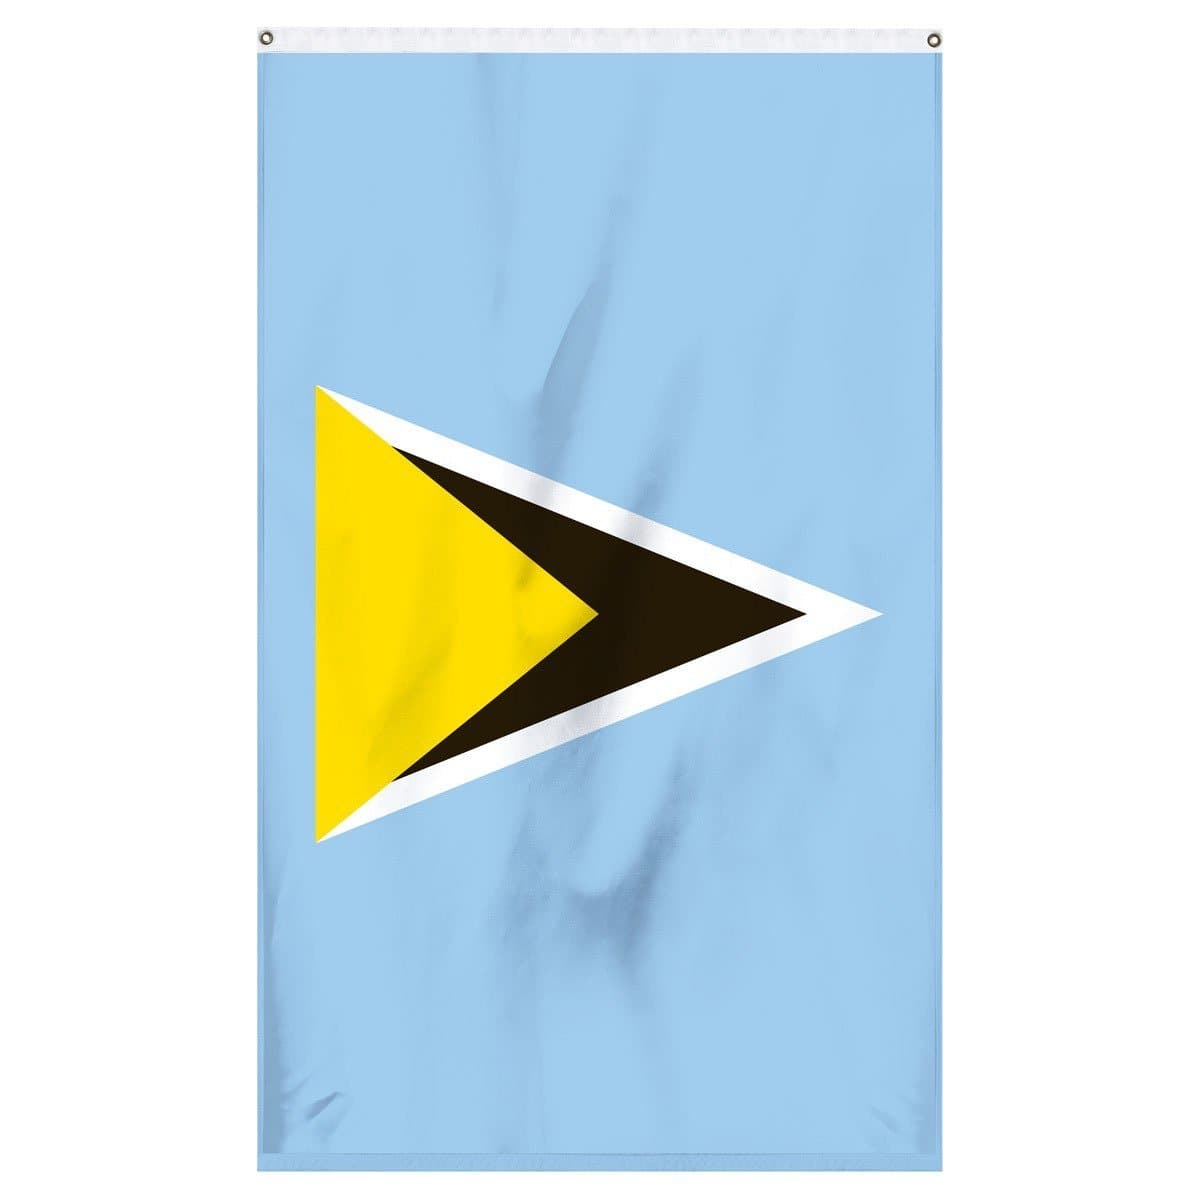 Saint Lucia National flag for sale to buy online. Blue flag with black, white, and yellow triangles.